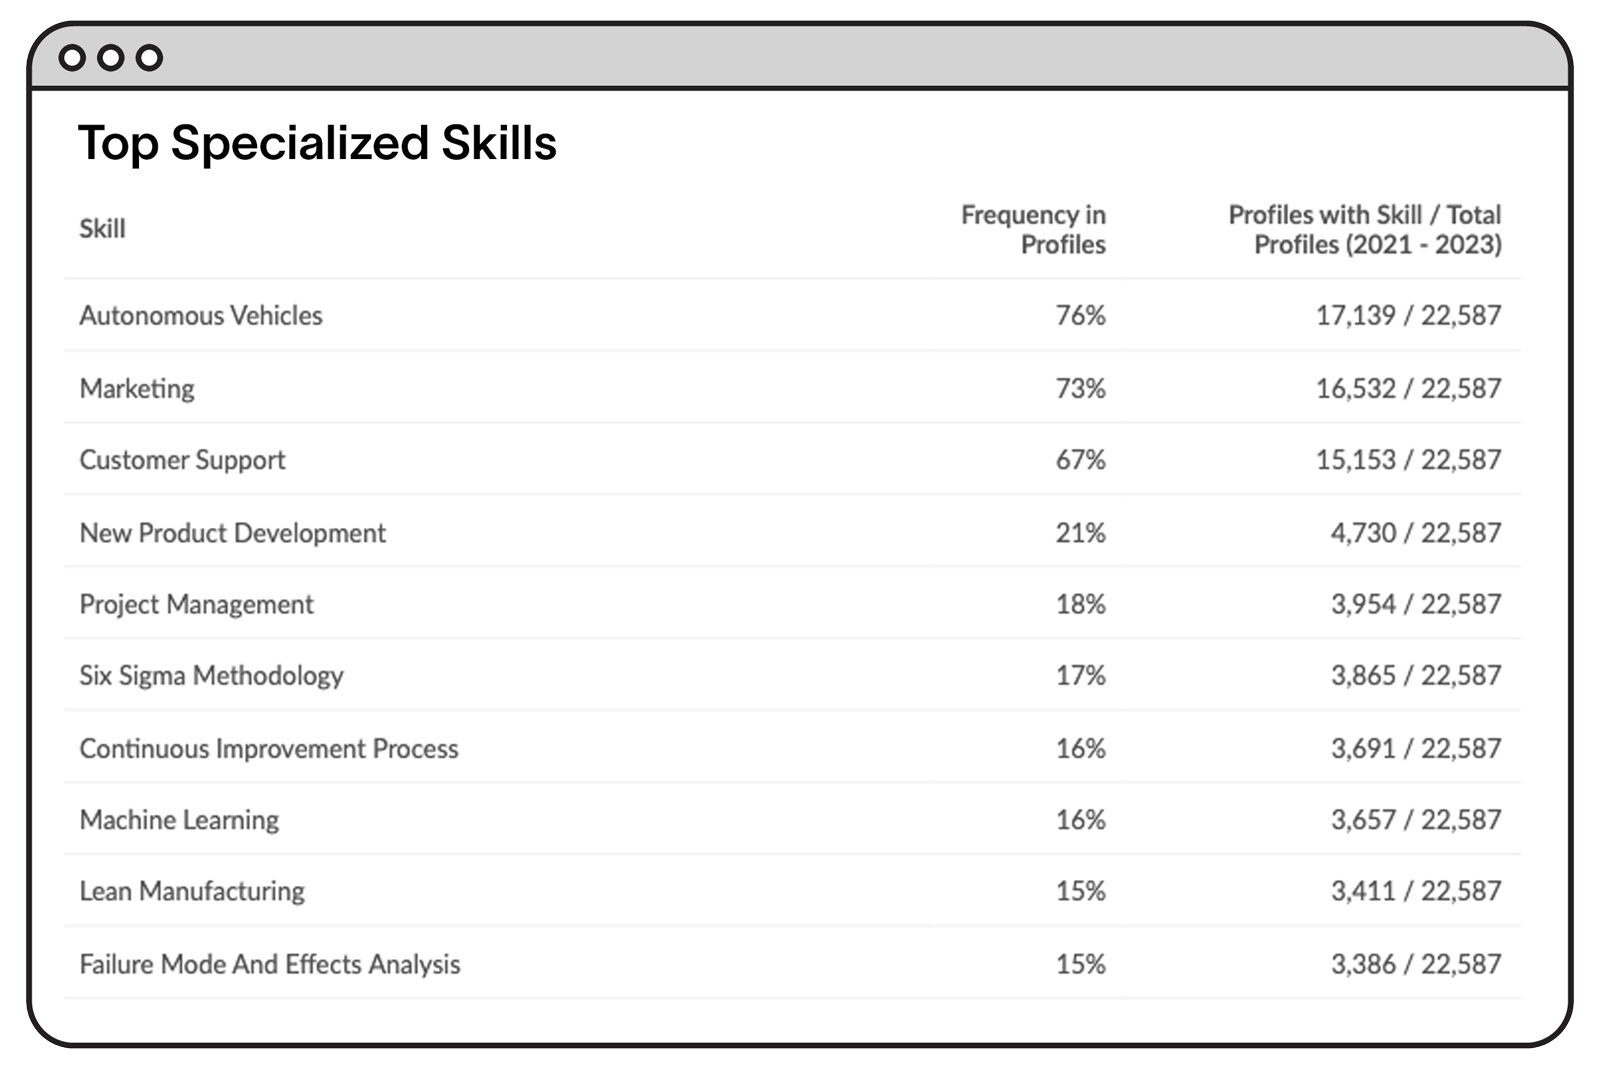 Top Specialized Skills Screen Image - Detroit